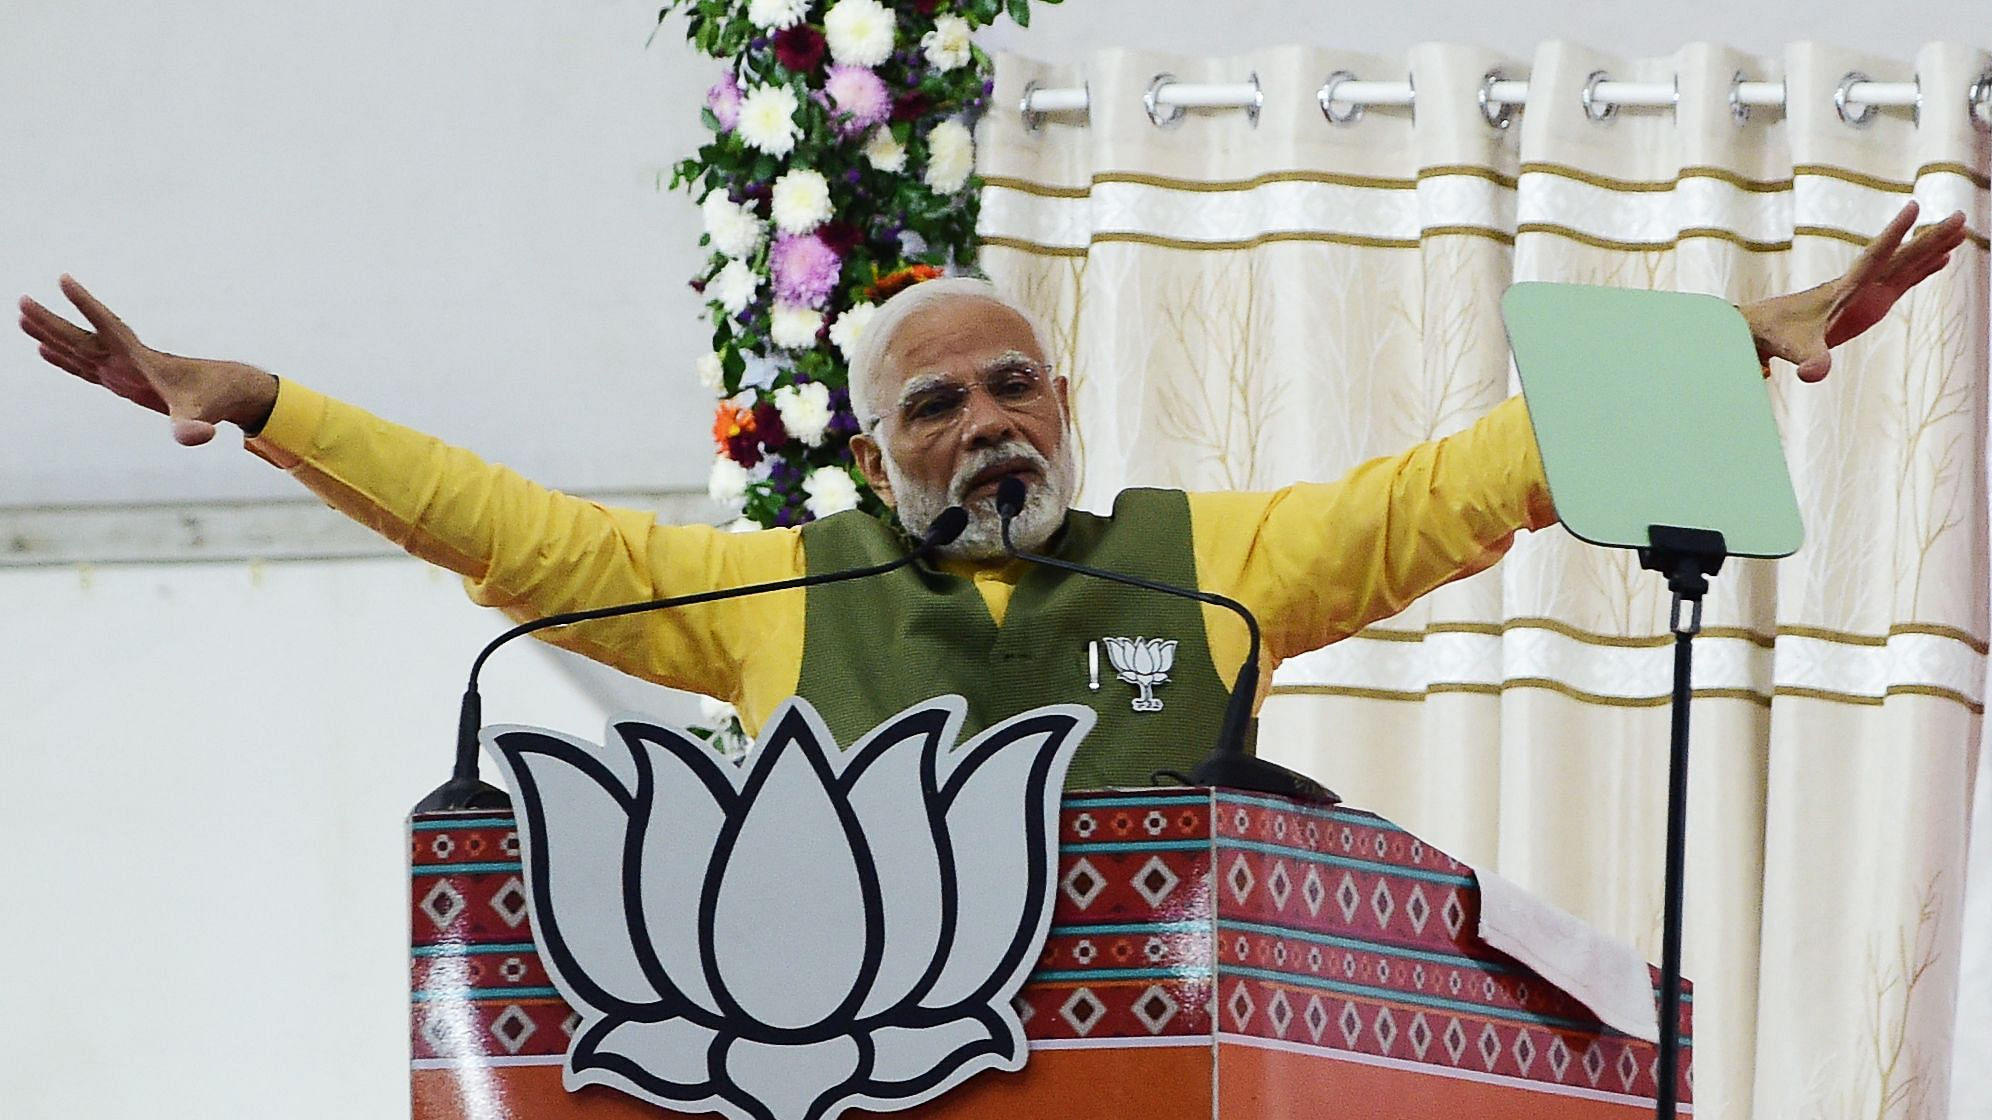 Modi, who rides an enduring wave of popularity as his second term is coming to a close, looks poised to sustain fiscal consolidation as he takes the global stage with India’s presidency of the Group of 20 nations. Credit: AFP Photo